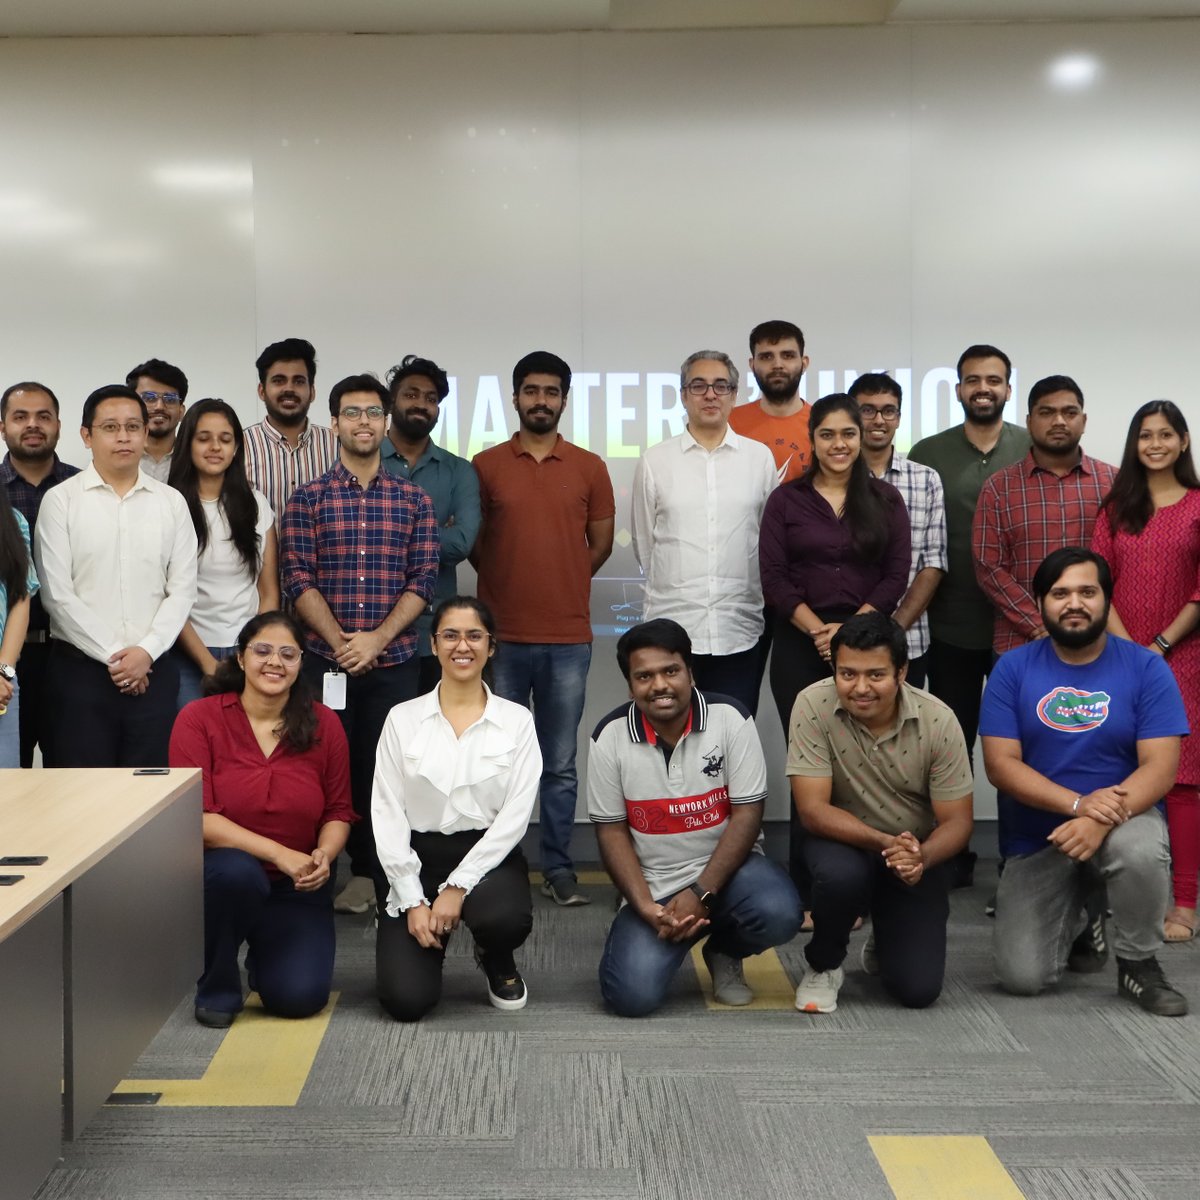 @Aroraruchir, Co-Founder & CEO of @CollegeDekho, joined us recently on campus for a #SeriesC session and shared insights on how to transition from #academics to #entrepreneurship. Thank you for joining us, Ruchir!

#MastersUnion #MBA #Bschool #CollegeDekho